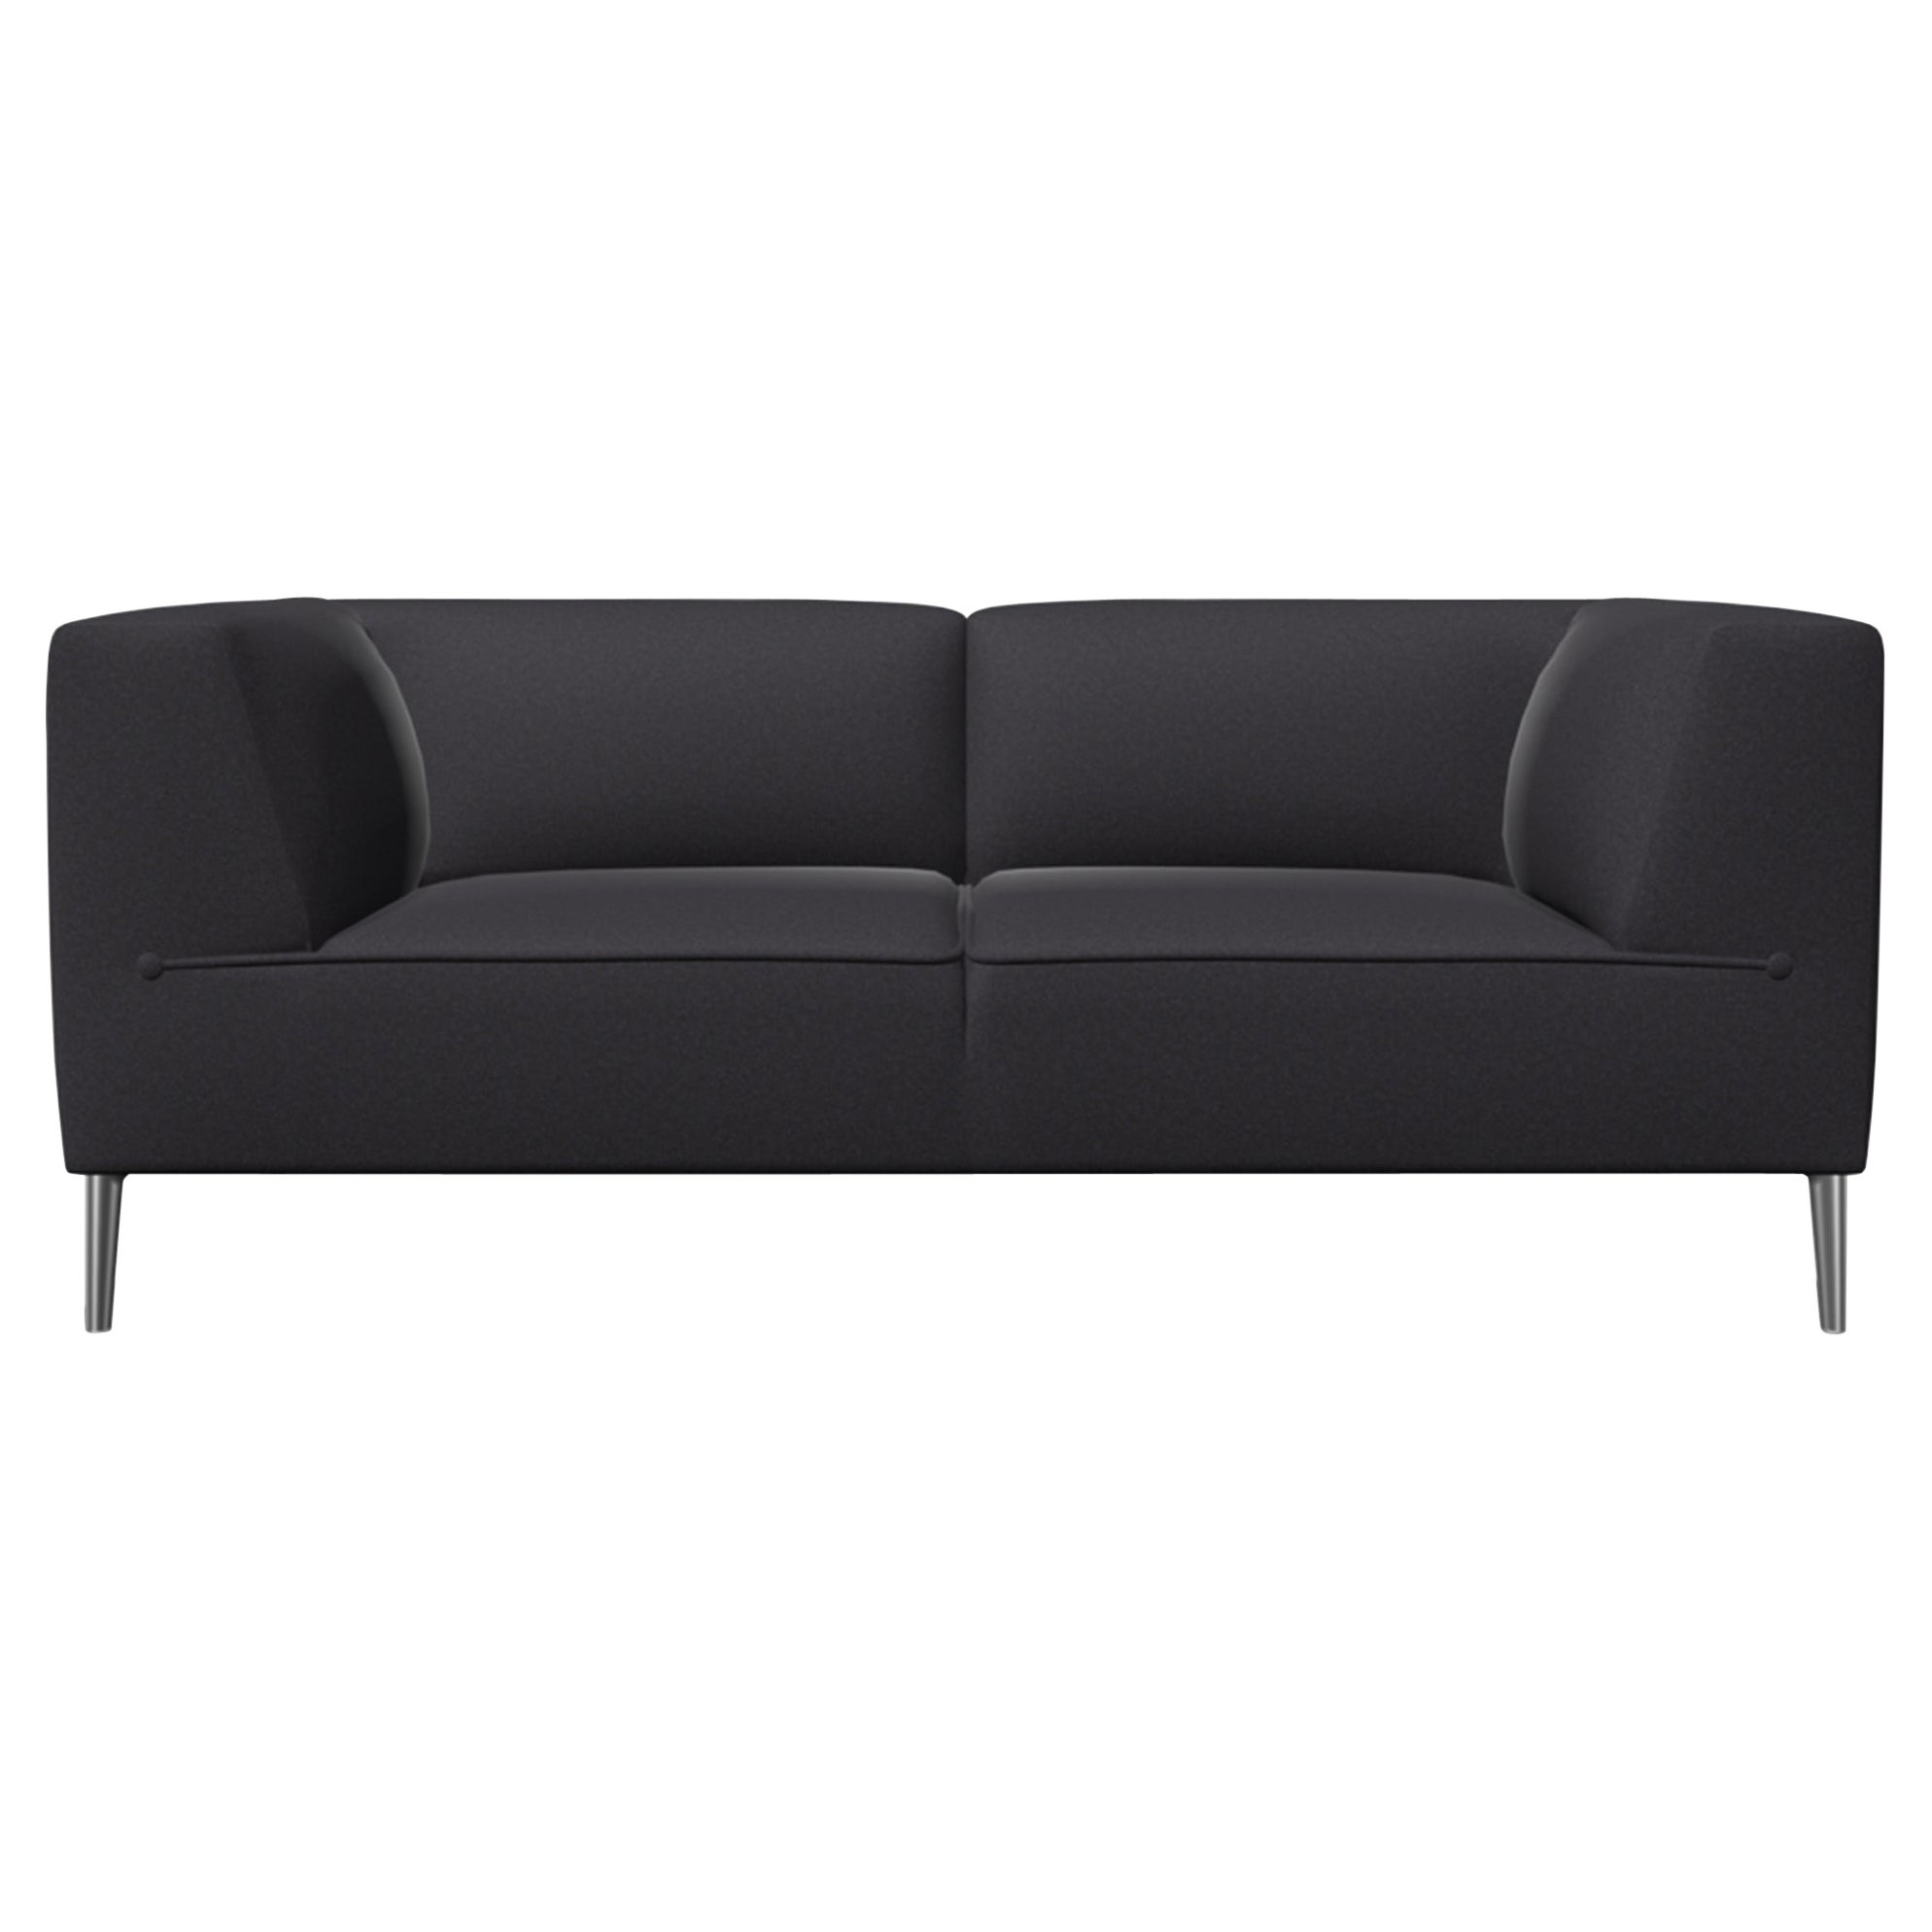 Moooi Double Seat Sofa So Good in Black Upholstery with Polished Aluminum Feet For Sale